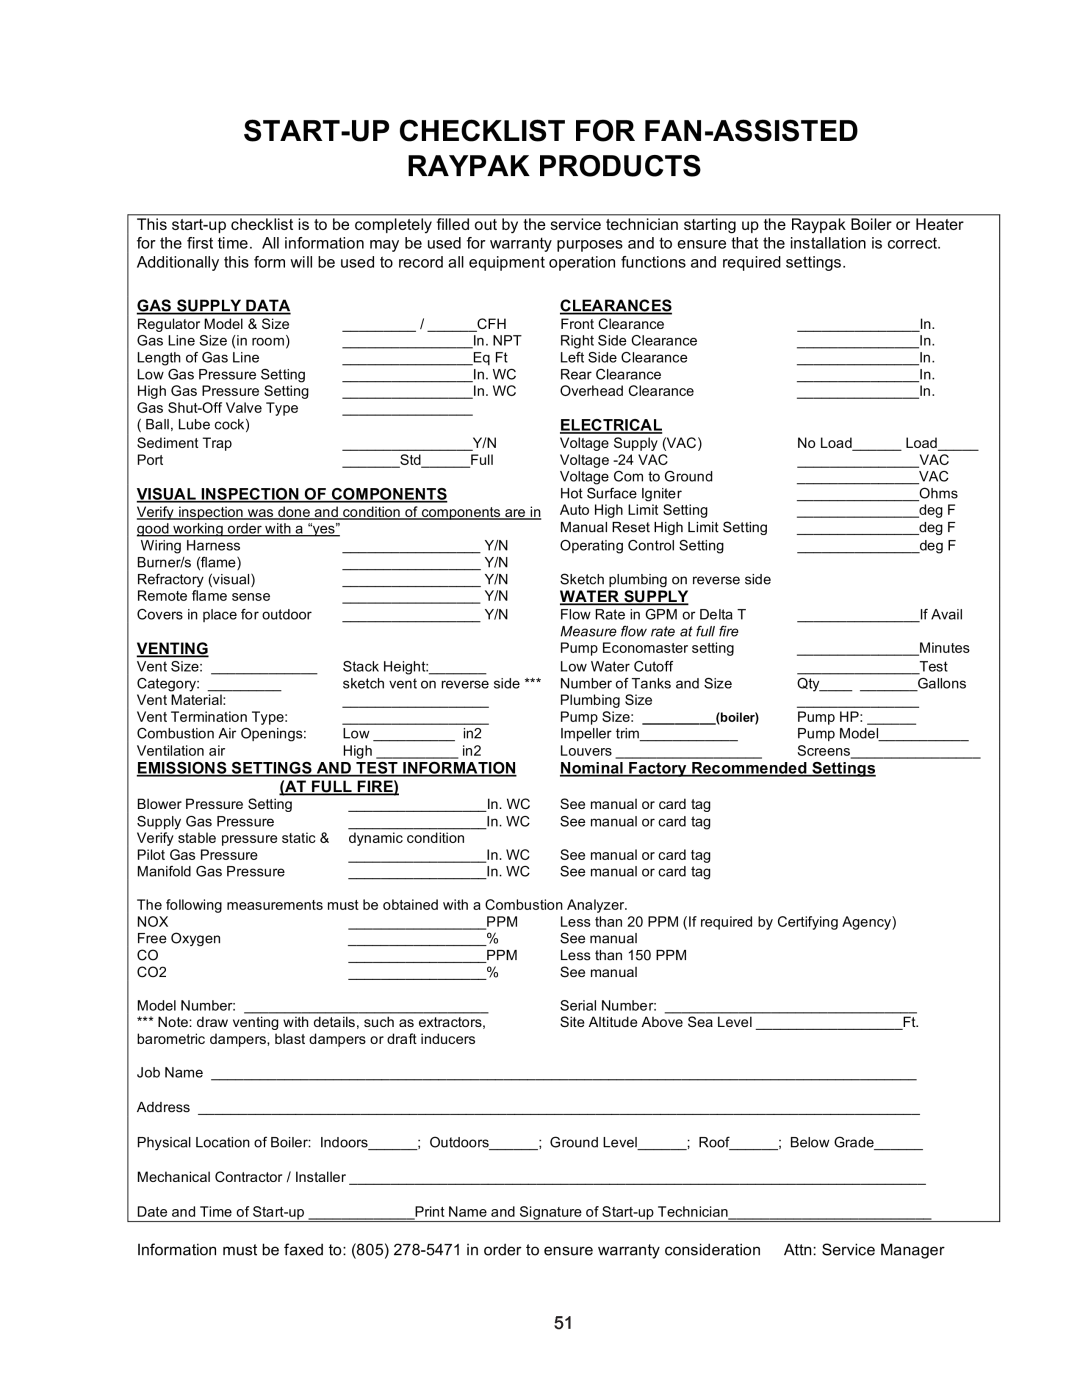 Raypak 399B-2339B Start-Upchecklist For Fan-Assisted, Raypak Products, Gas Supply Data, Clearances, Electrical, Venting 